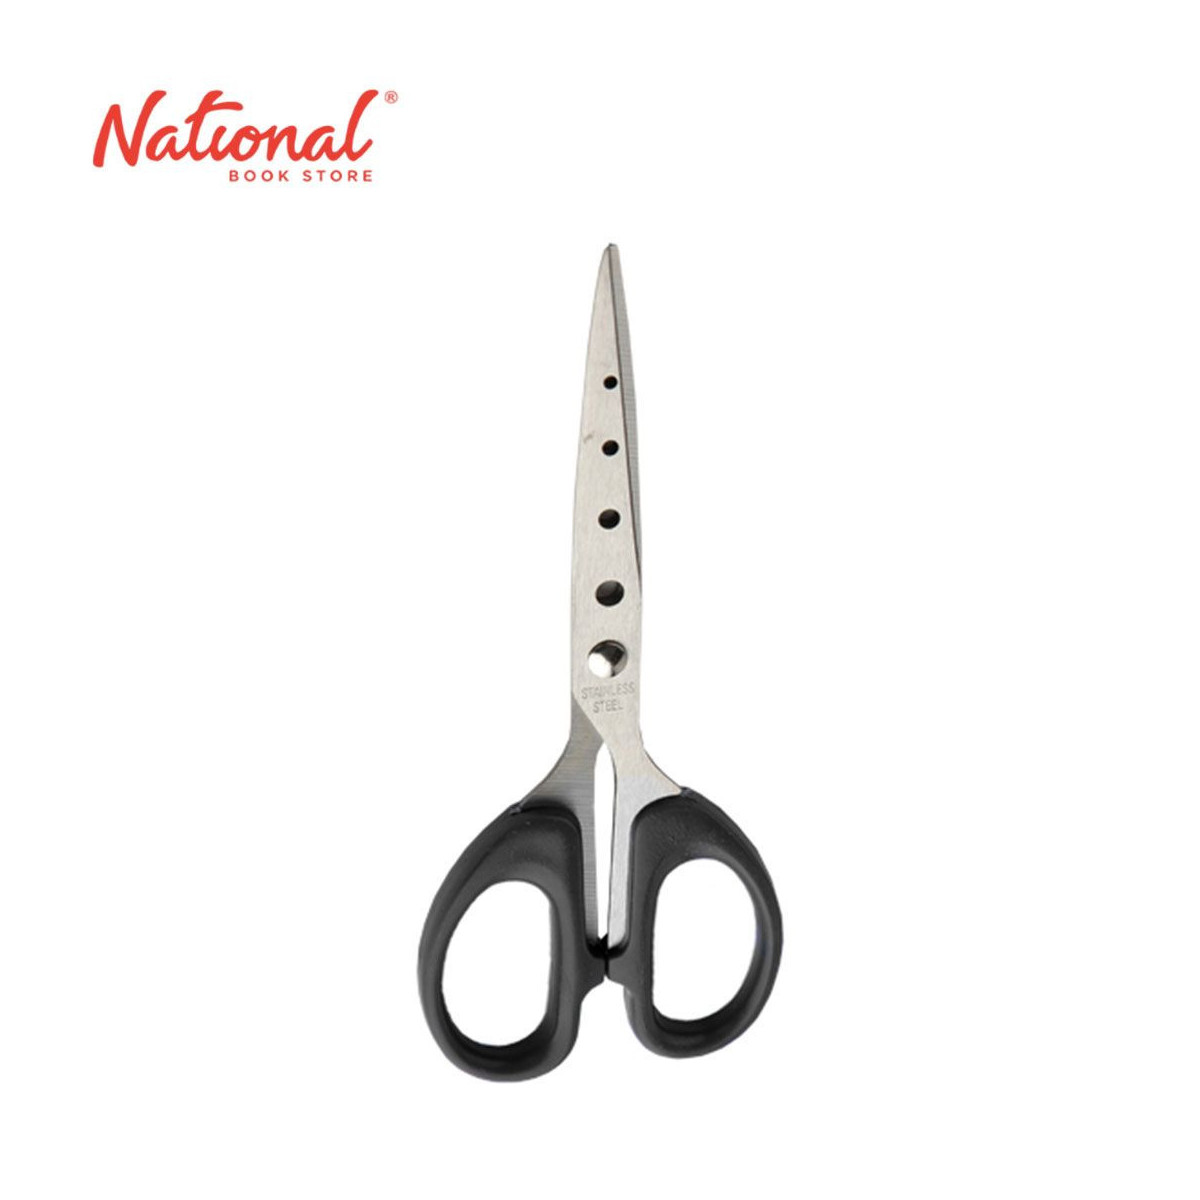 Long Life Multi-Purpose Scissors Pointed Stainless with Holes Black 6 Inches S3283